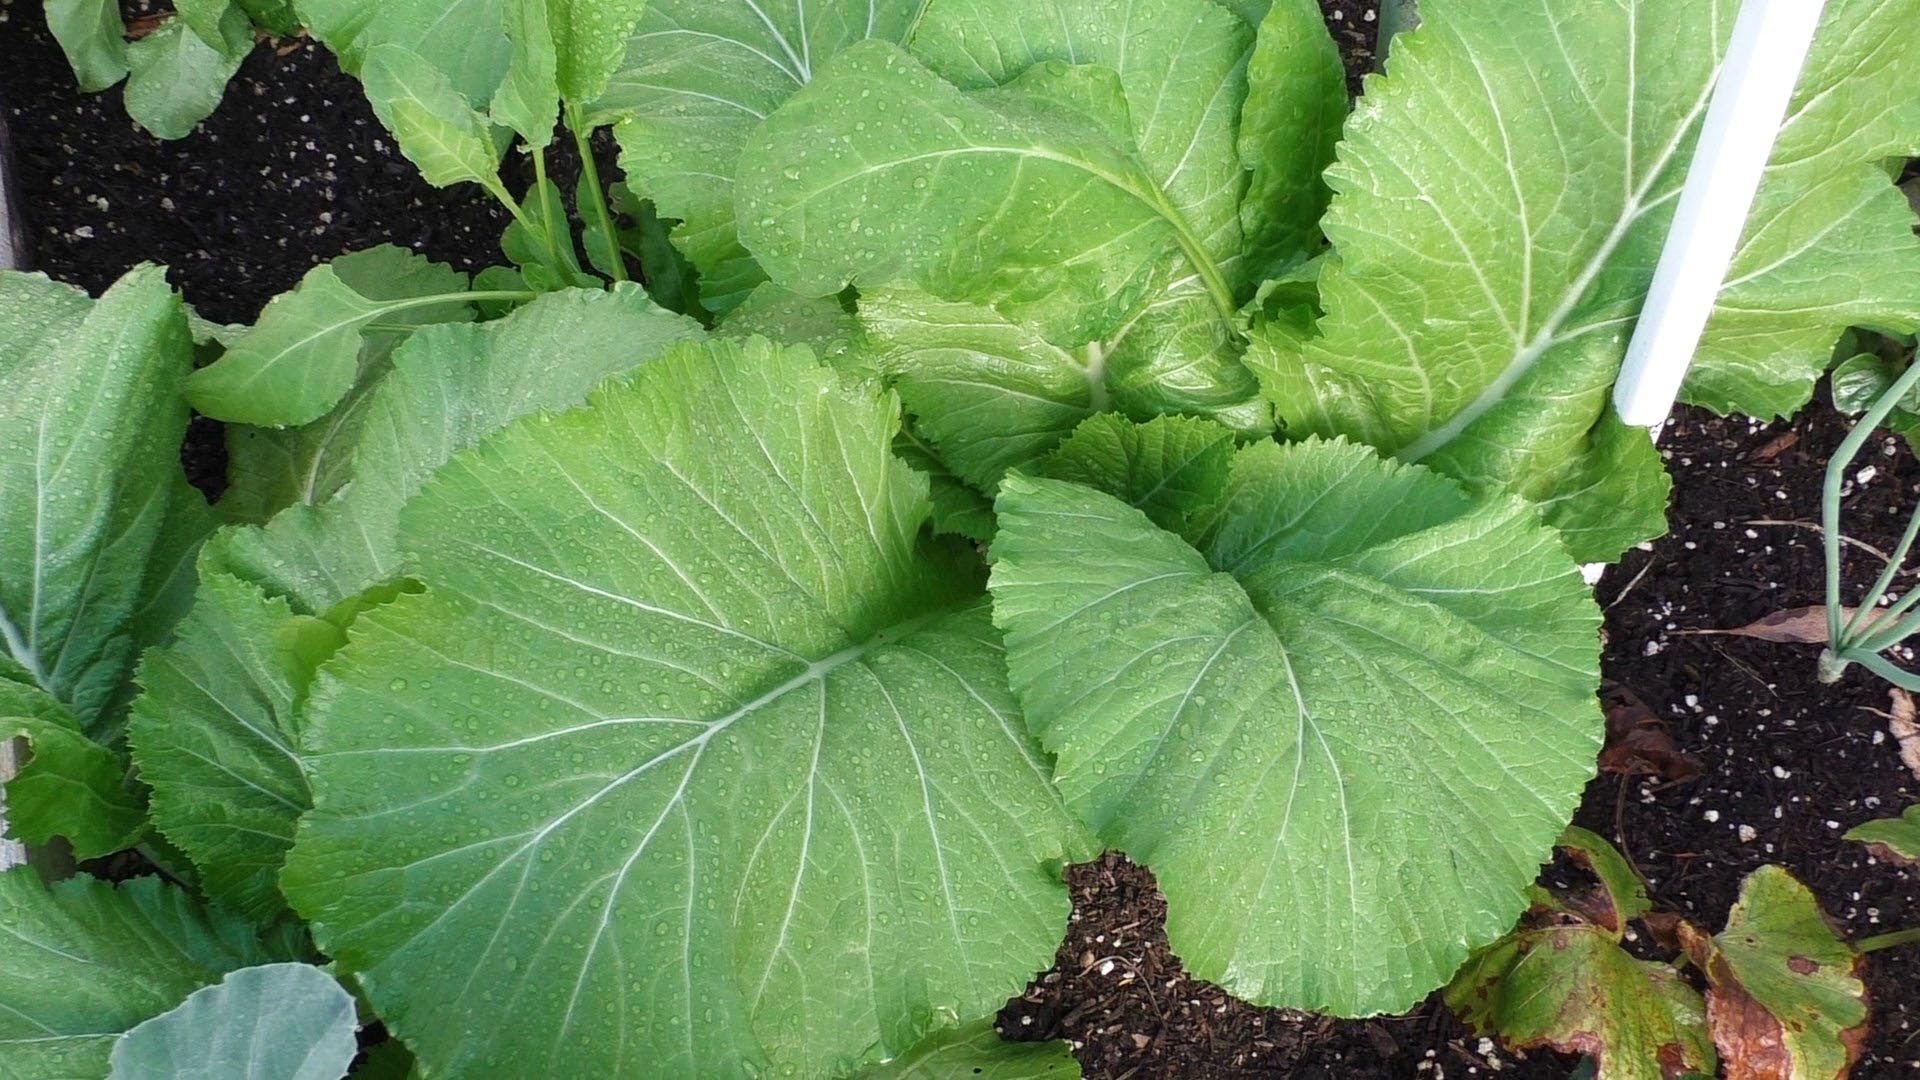 Growing Mustard Greens - How To Grow Florida Broad Leaf Indian ...